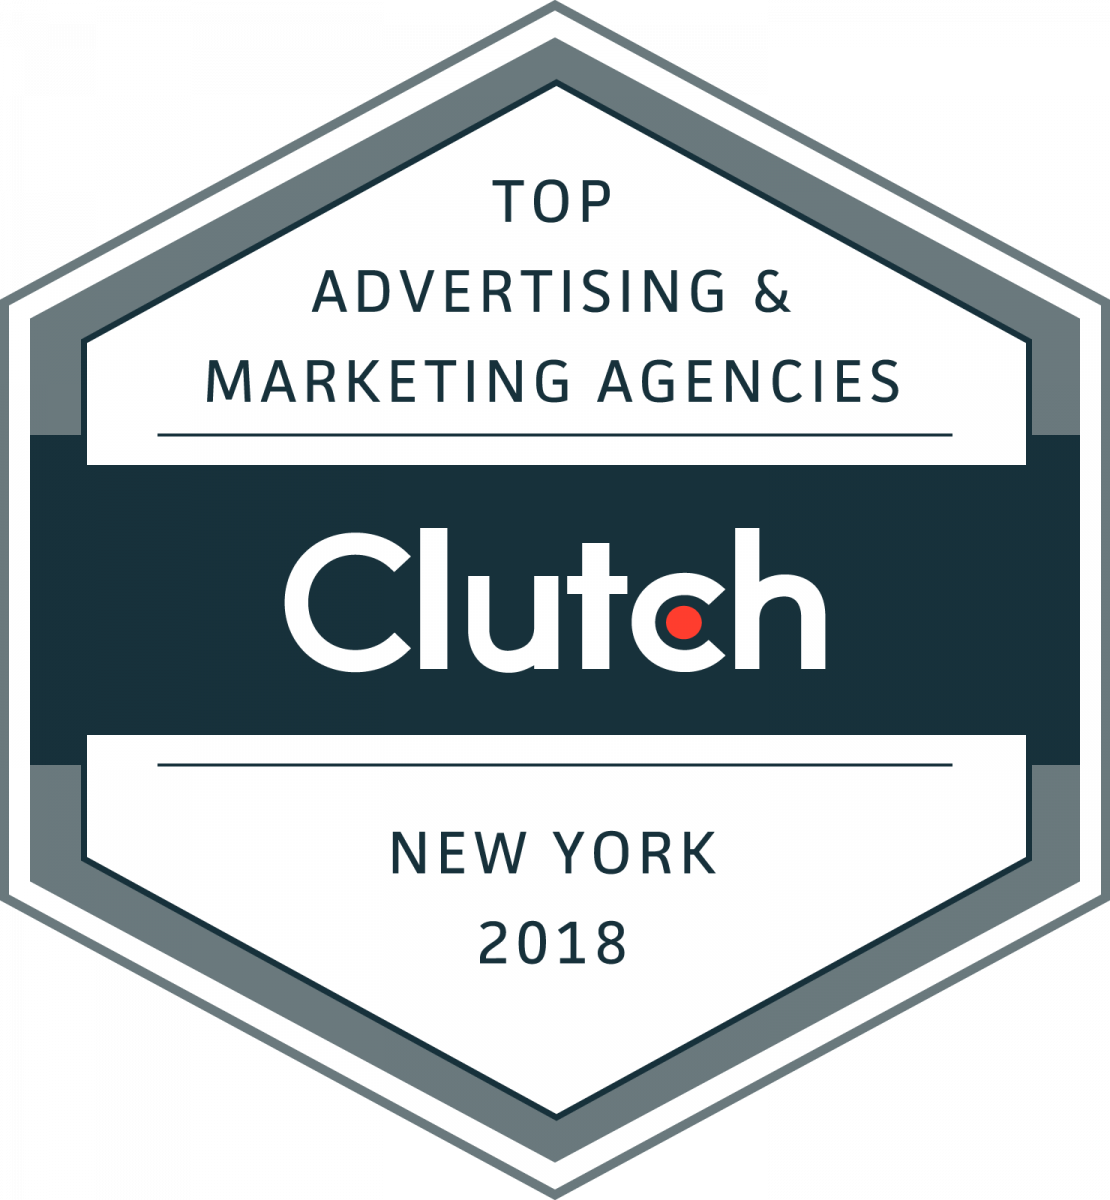 Clutch Reports Top Marketing, Advertising, IT, and Business Services Companies in New York City for 2018